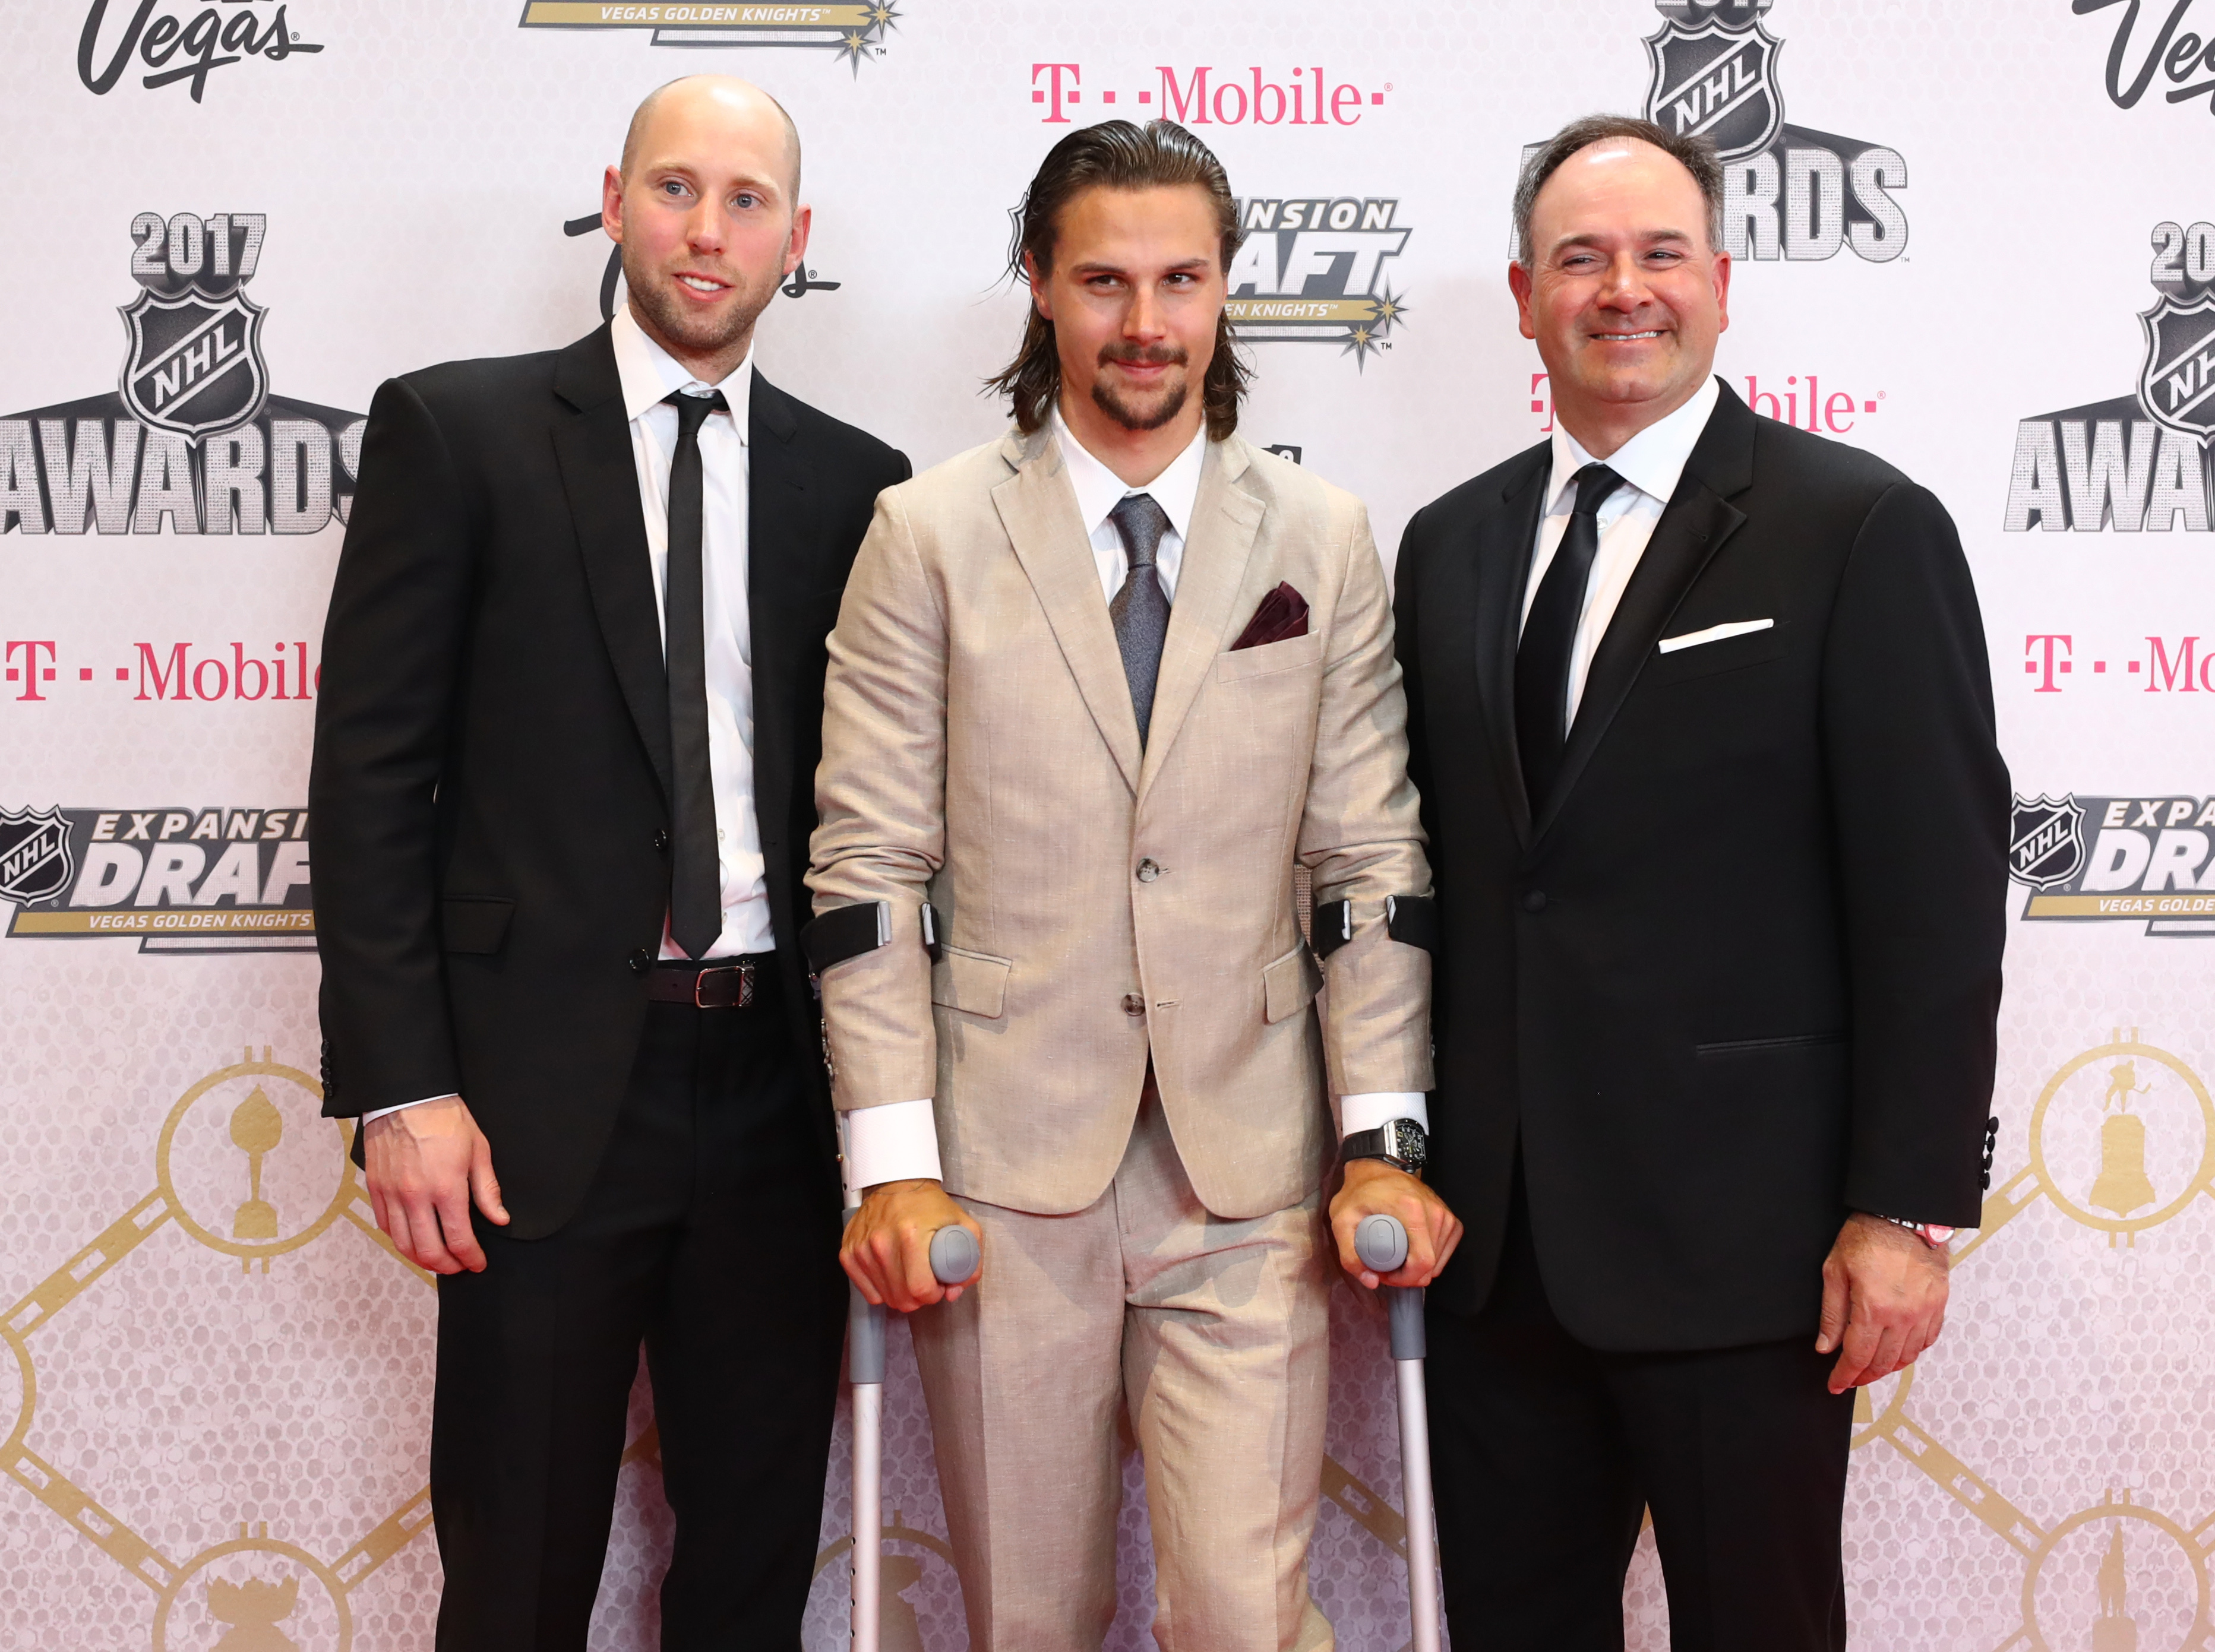 Craig Anderson, Erik Karlsson and Pierre Dorion of the Ottawa Senators attend the 2017 NHL Awards at T-Mobile Arena on June 21, 2017 in Las Vegas, Nevada.